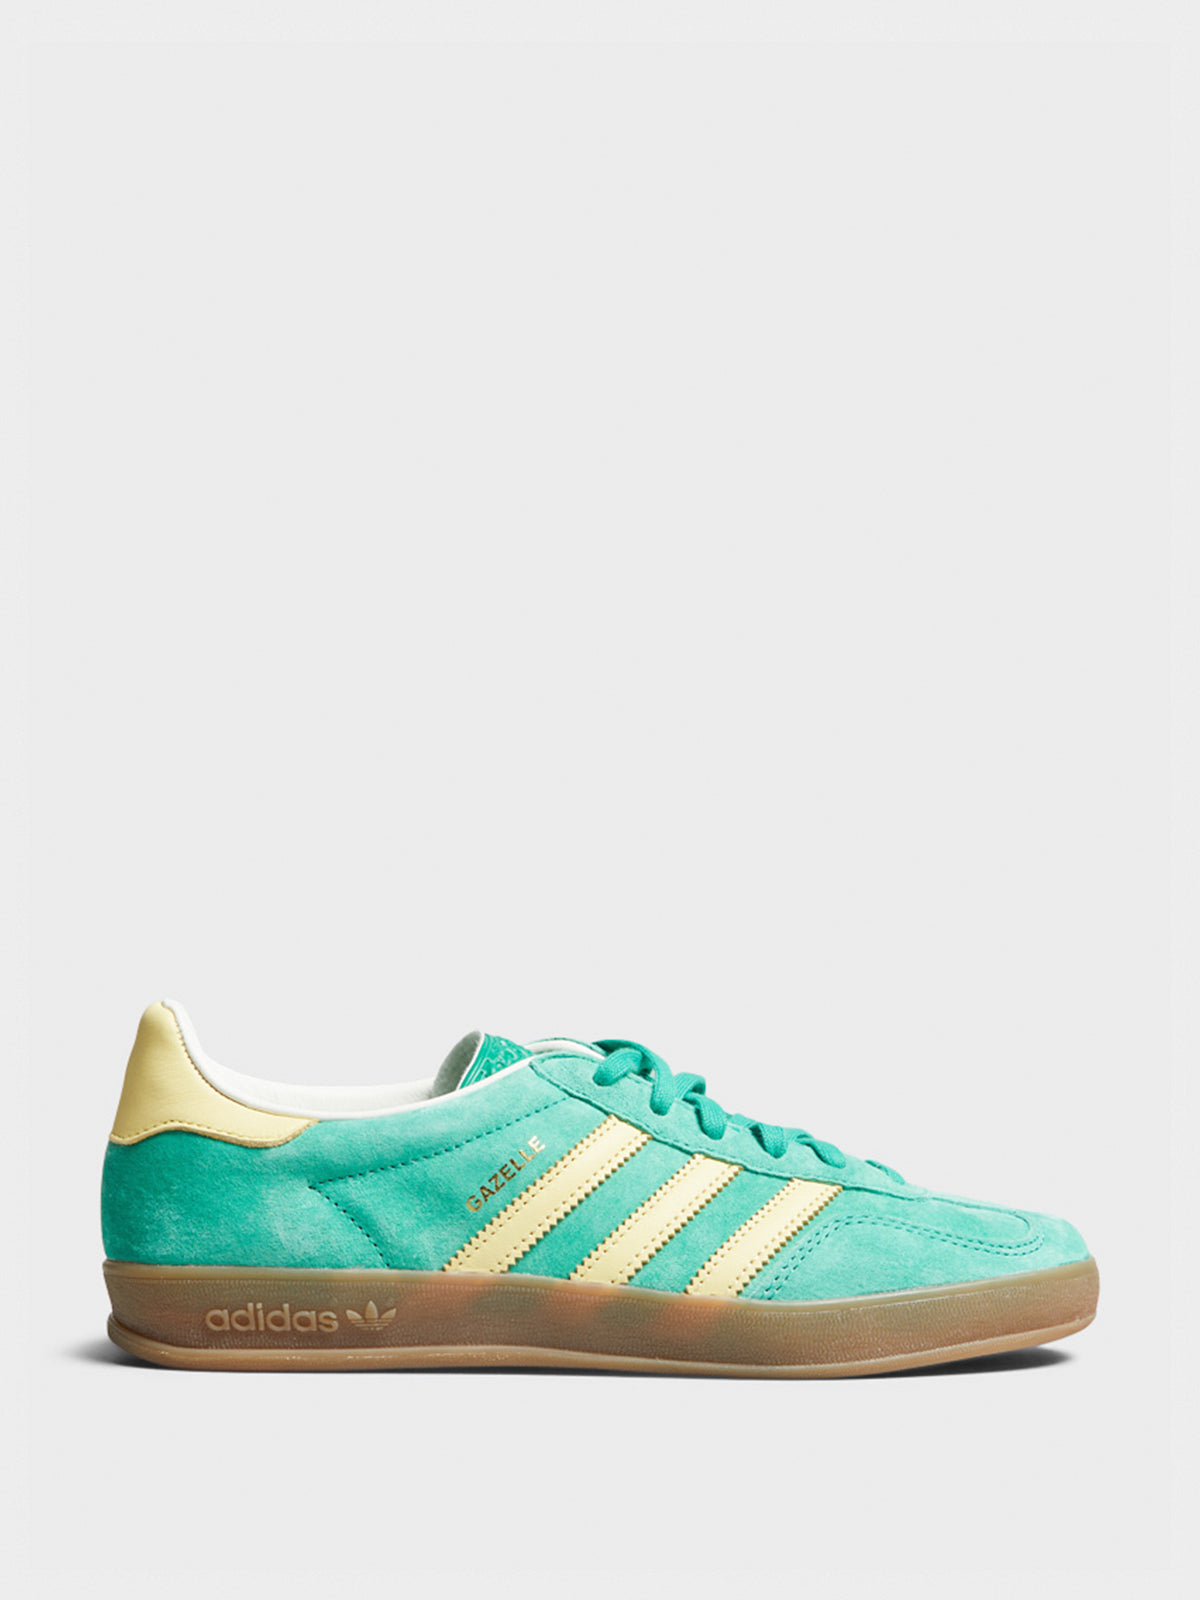 Adidas - Gazelle Indoor Sneakers in Green and Yellow